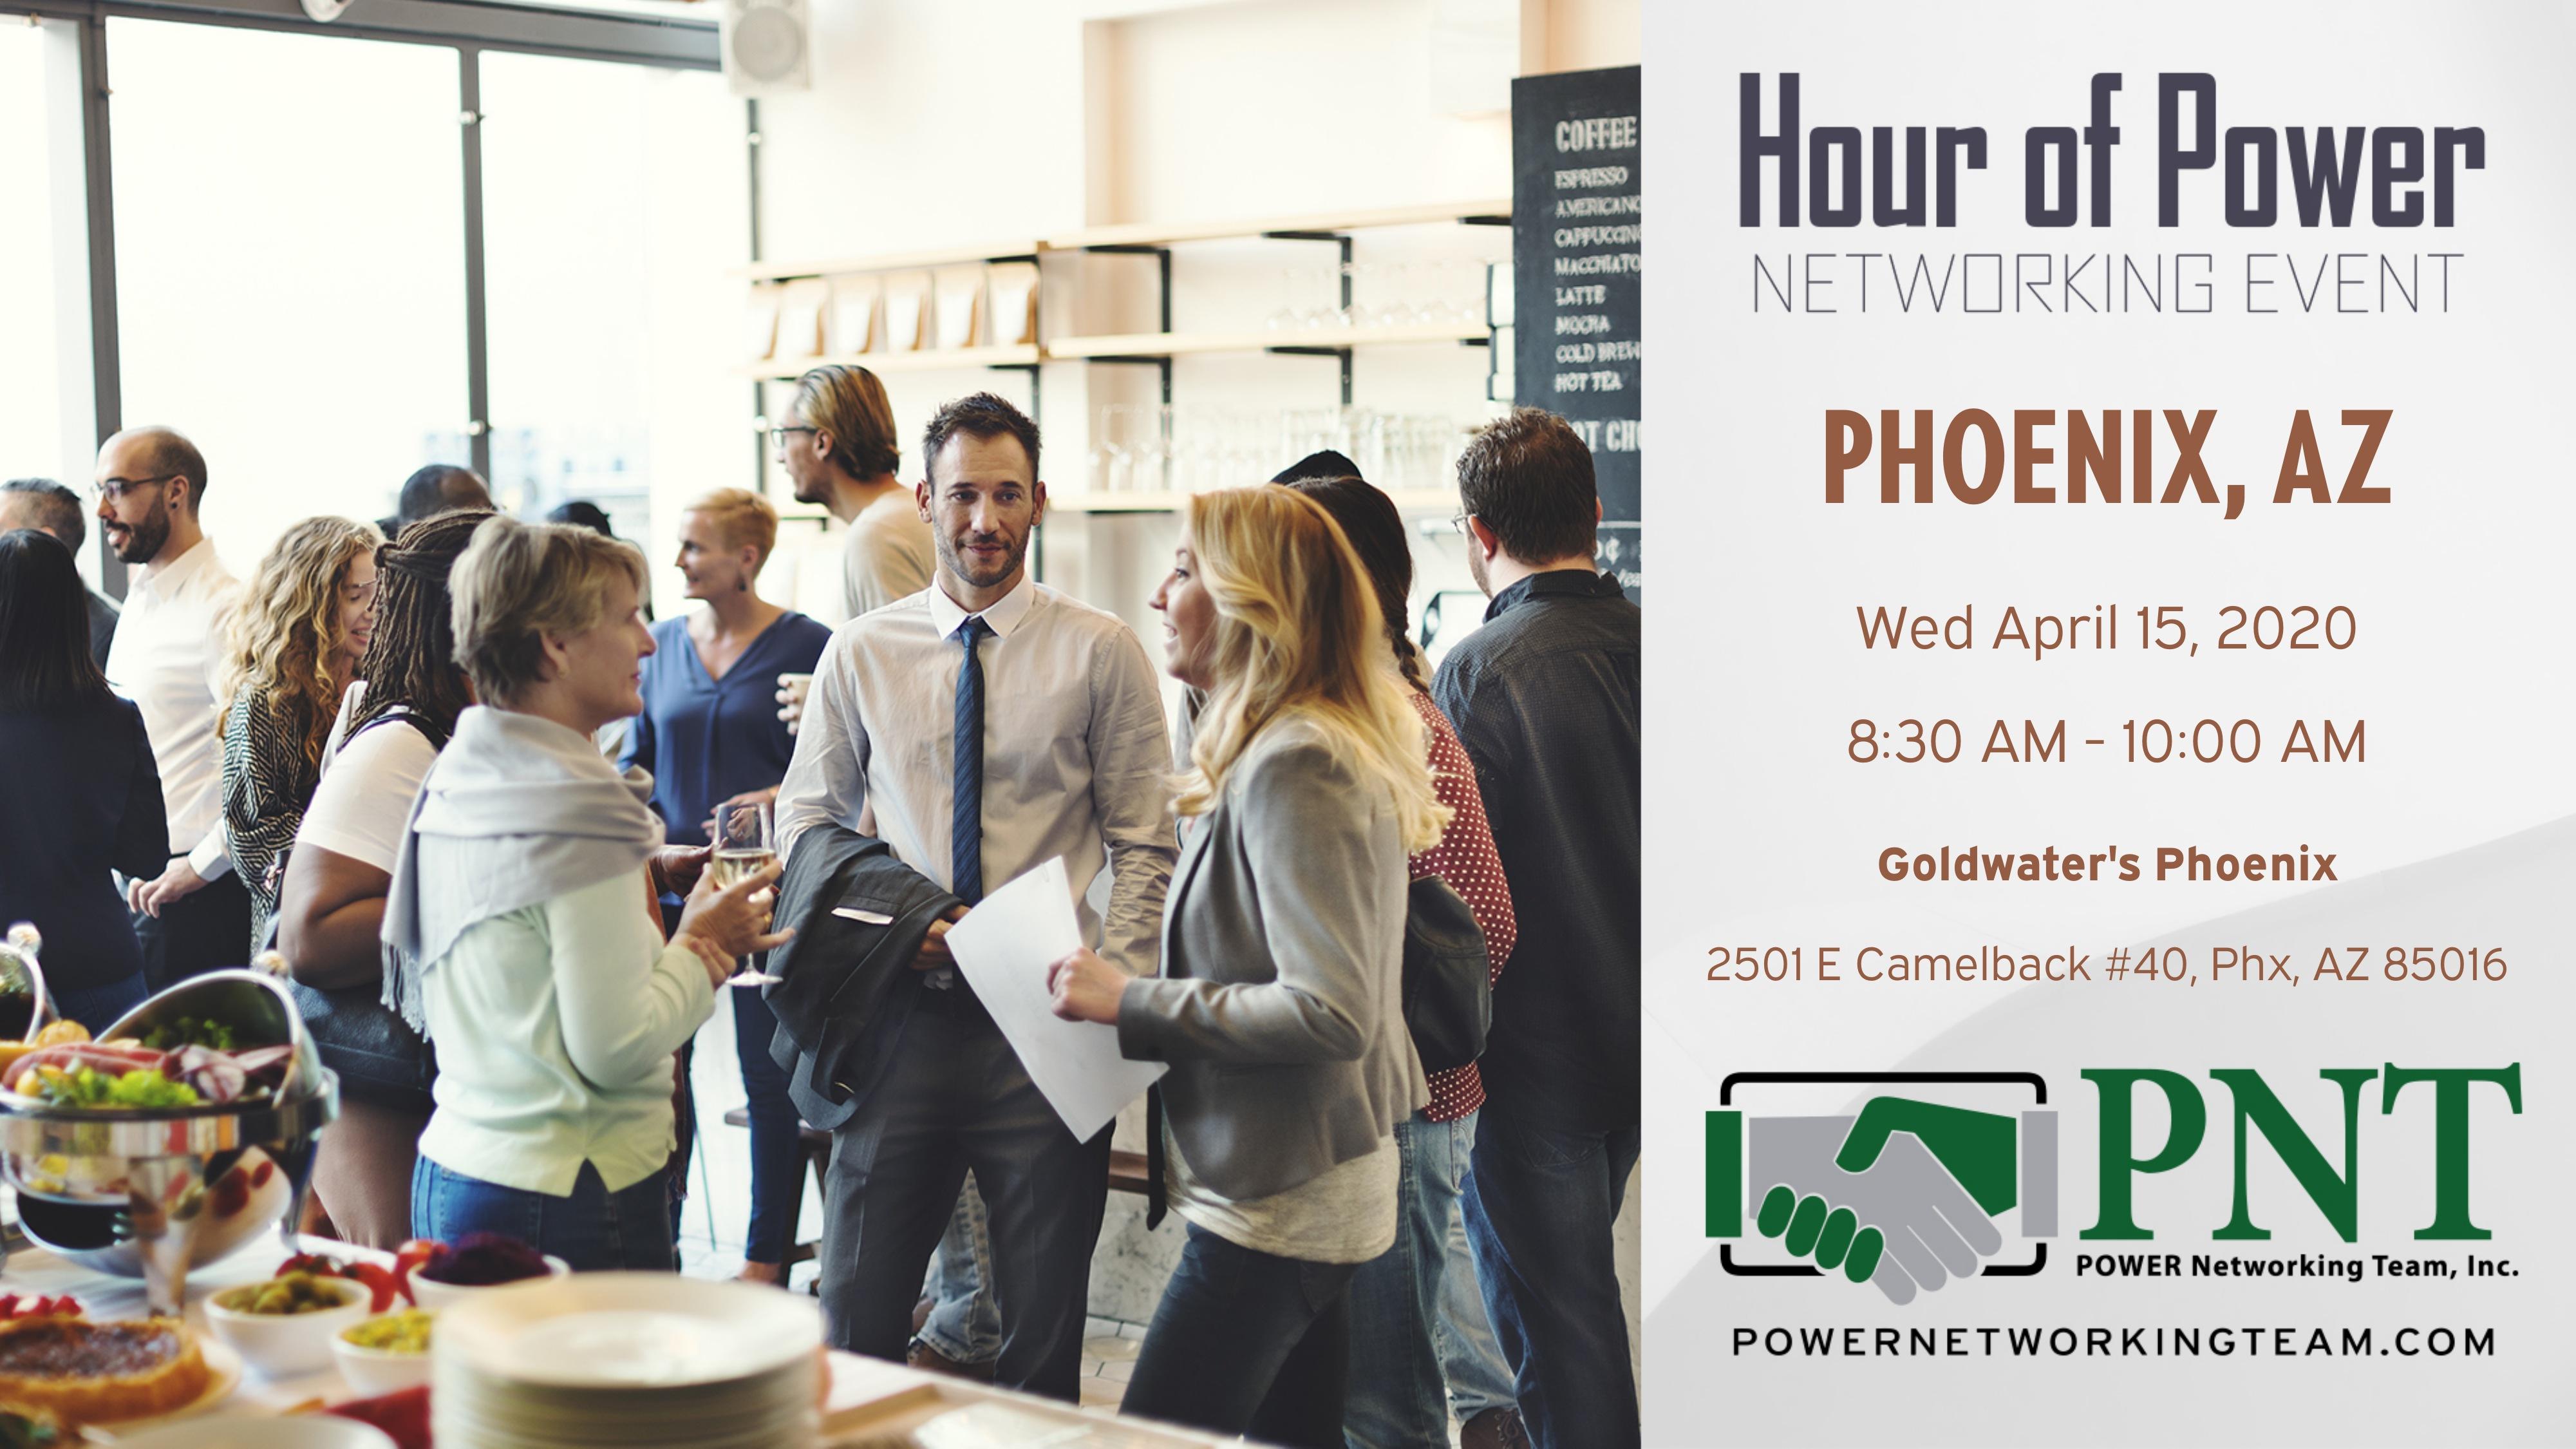 04/15/20 - PNT Phoenix-Biltmore - Hour of Power Networking Event